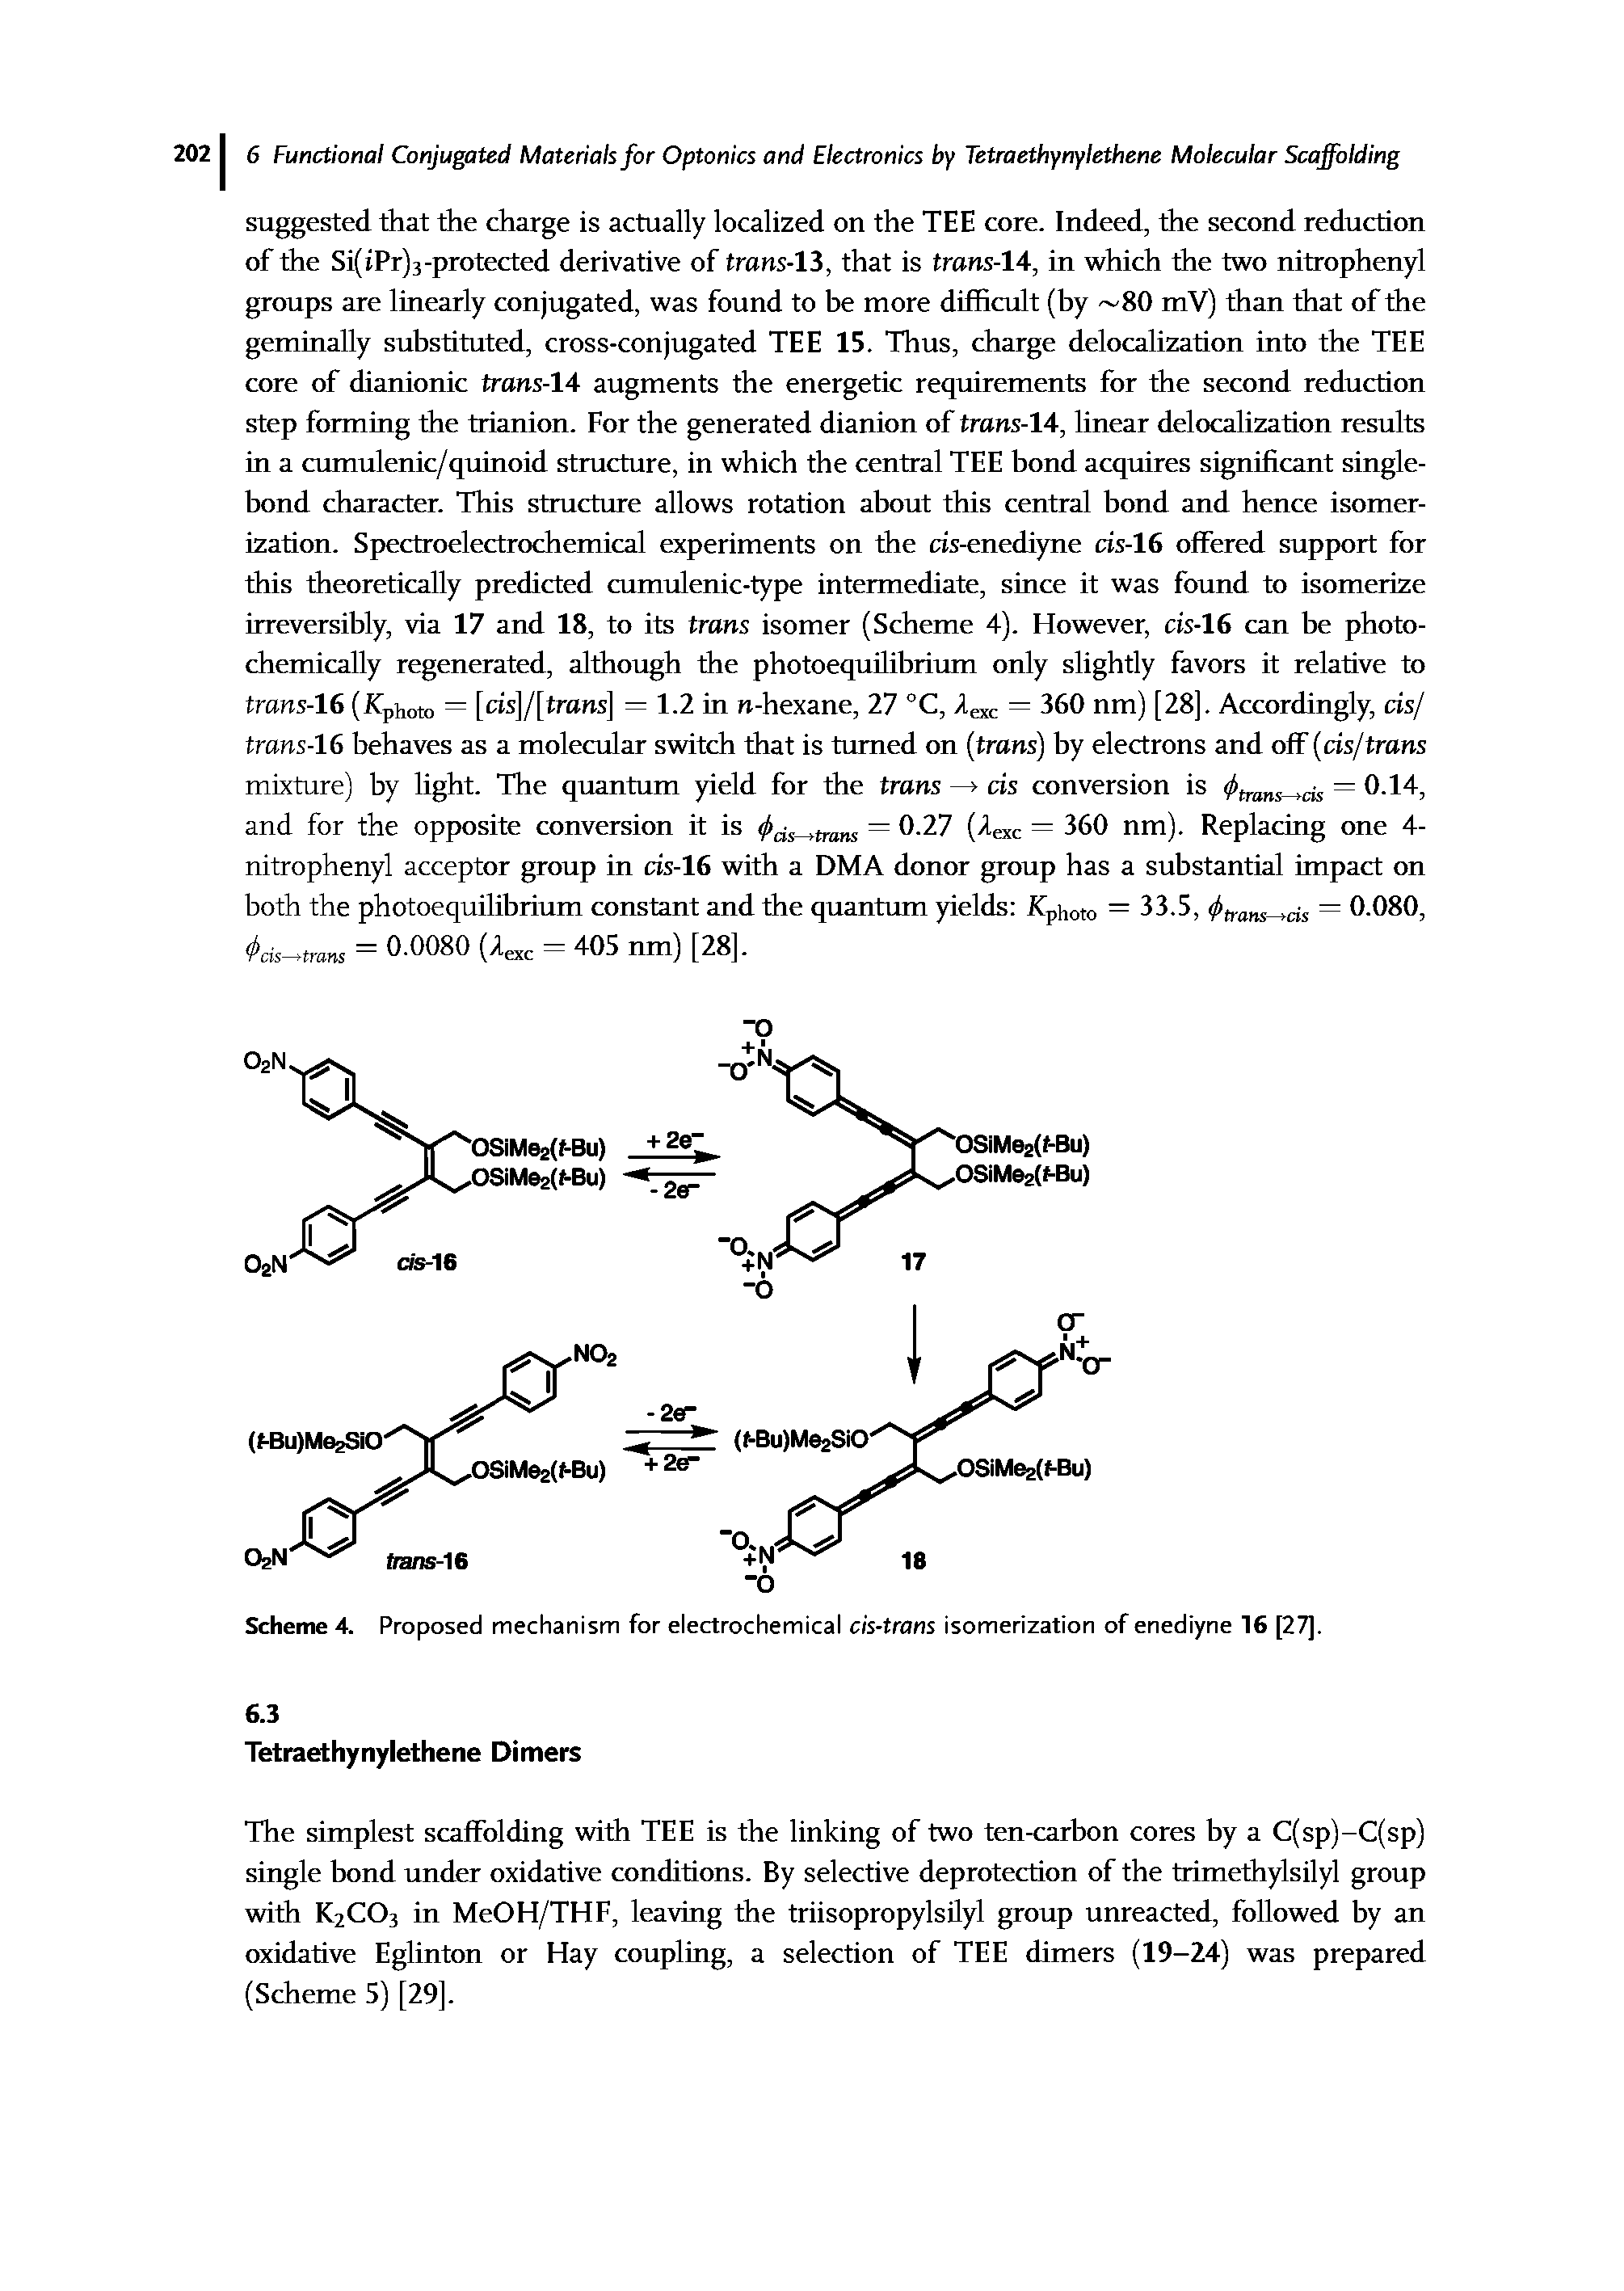 Scheme 4. Proposed mechanism for electrochemical cis-trans isomerization of enediyne 16 [27].